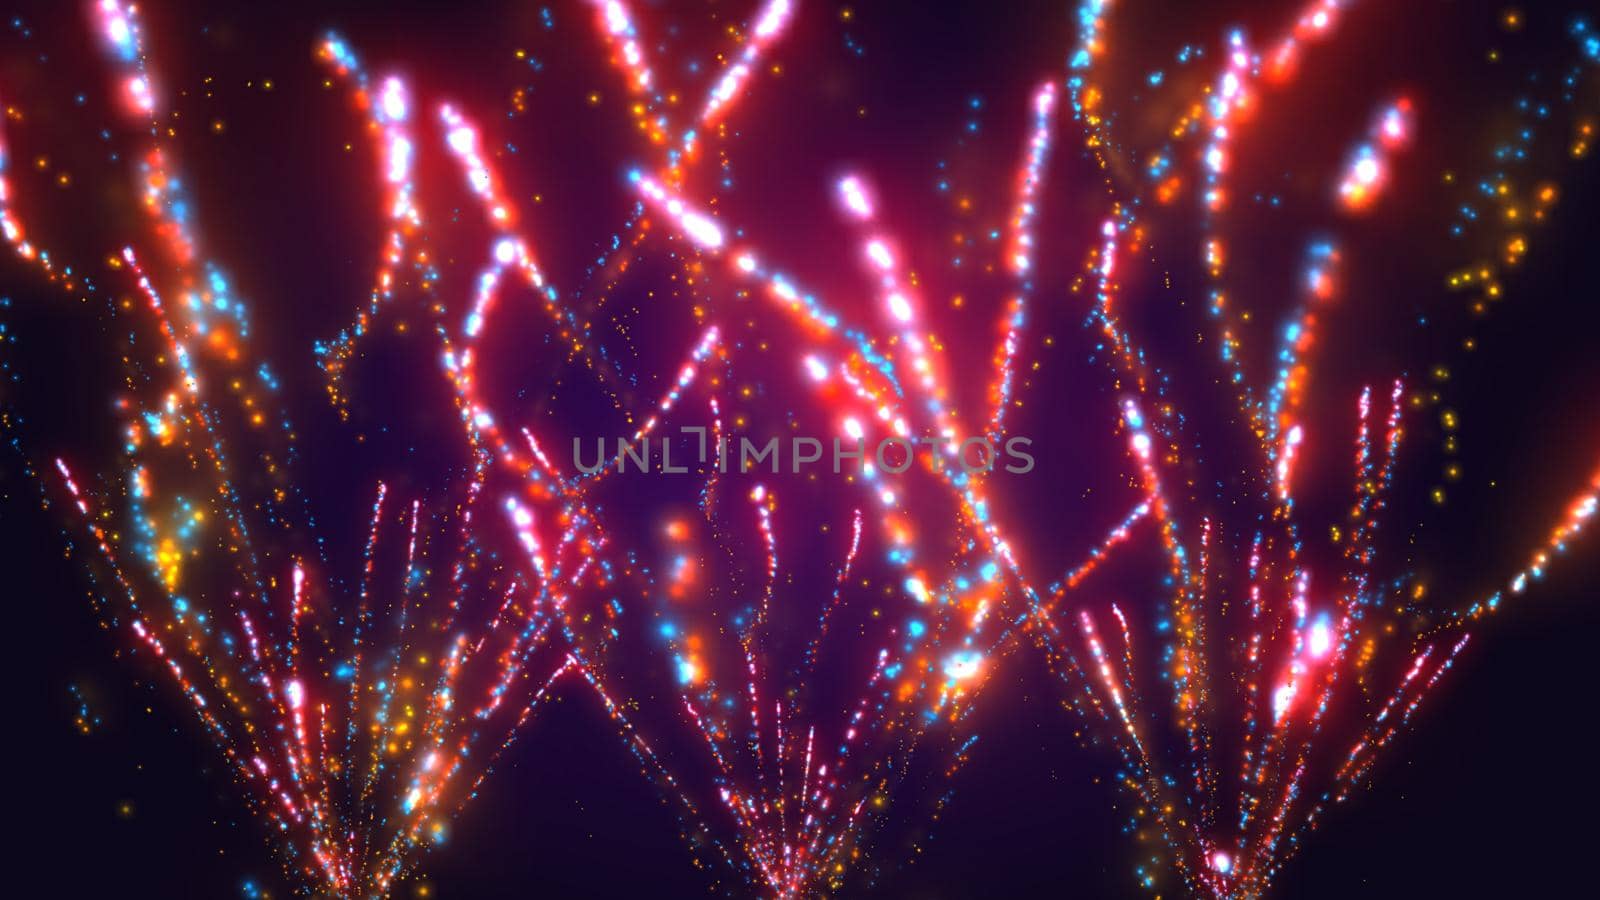 Abstract purple background with multicolored fireworks by Vvicca